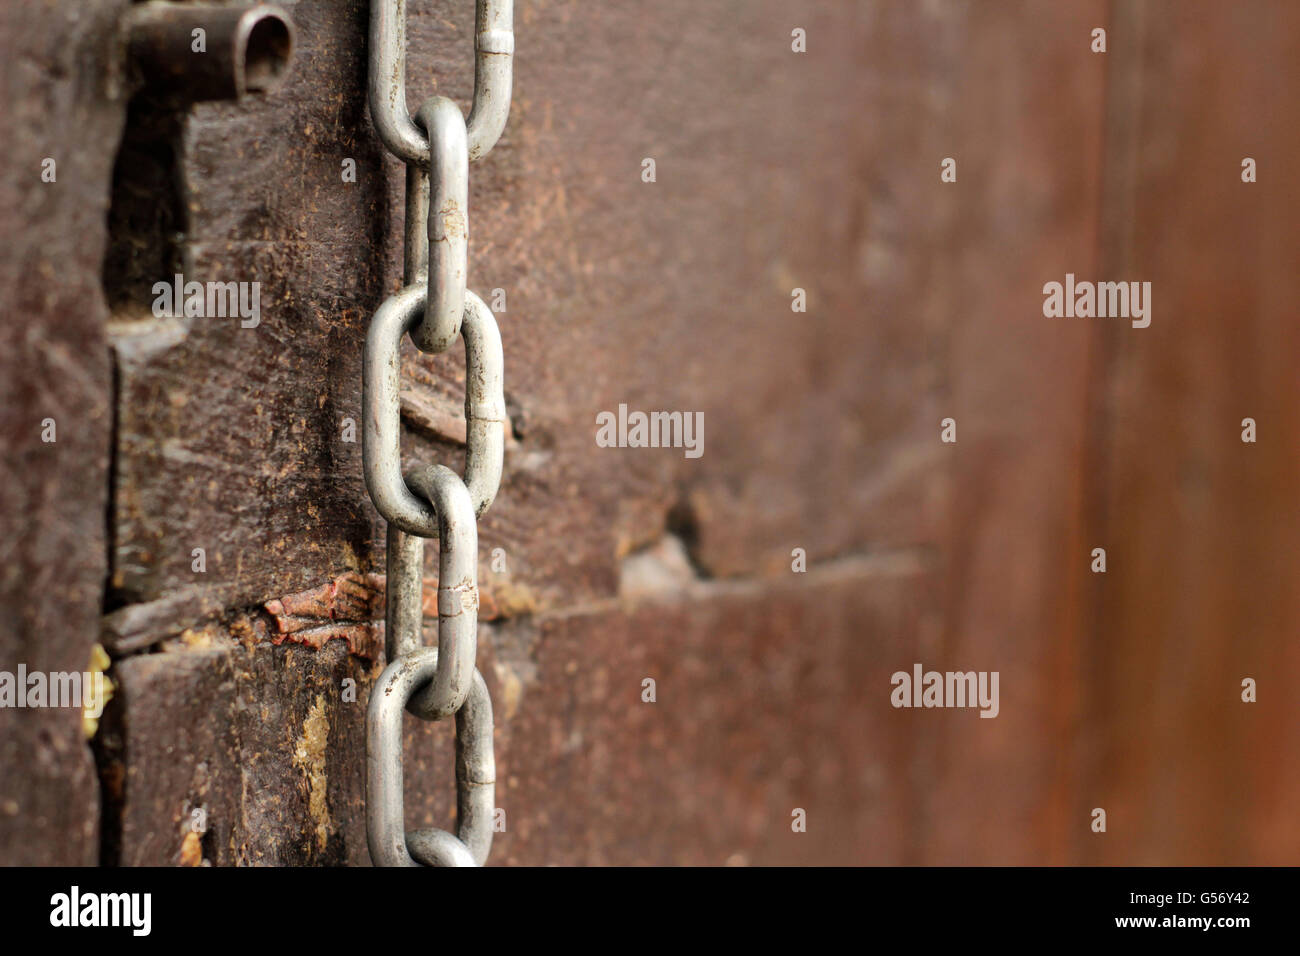 Photograph of a metal chain on wood door Stock Photo